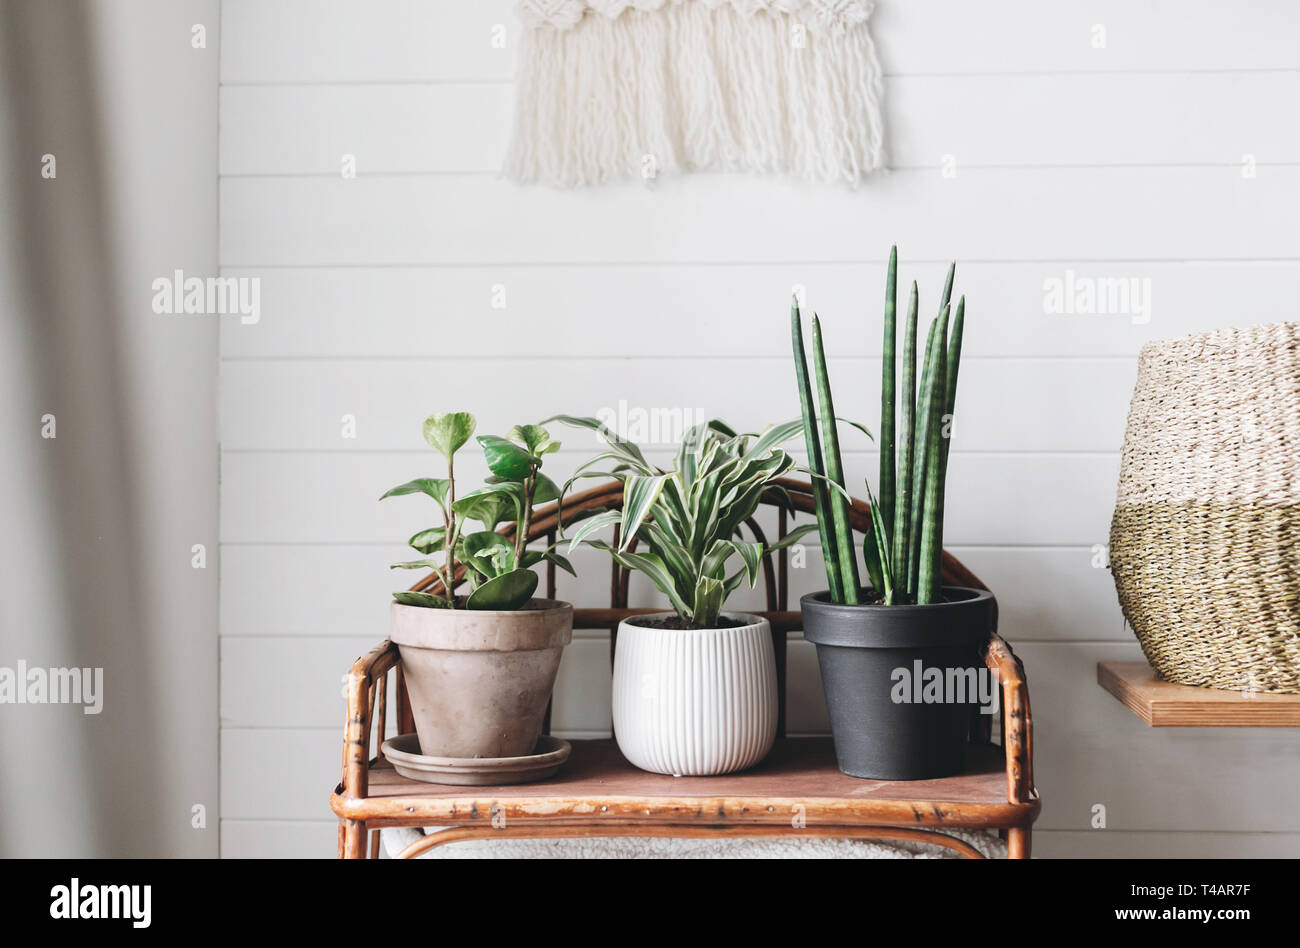 Stylish green plants in pots on wooden vintage stand on background of white rustic wall with embroidery hanging. Peperomia, sansevieria, dracaena plan Stock Photo